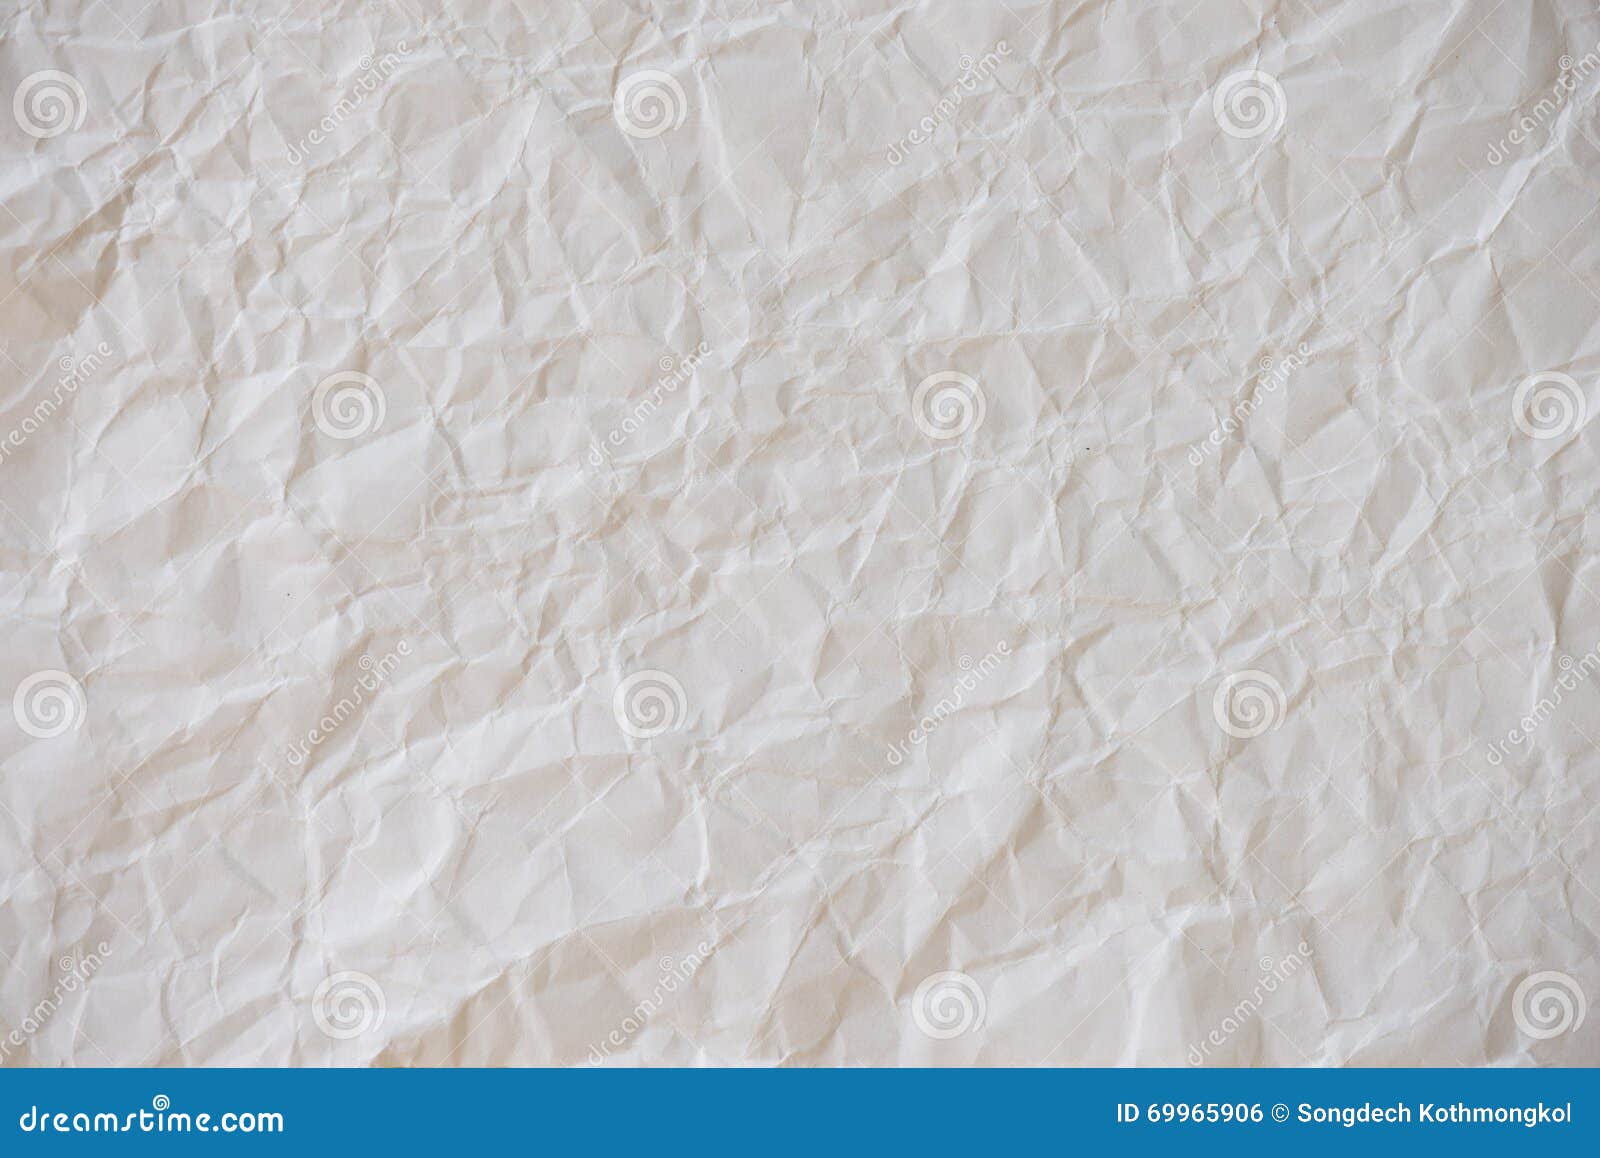 Old White Crumpled Paper Sheet Texture Stock Photo Image of background, folded 69965906